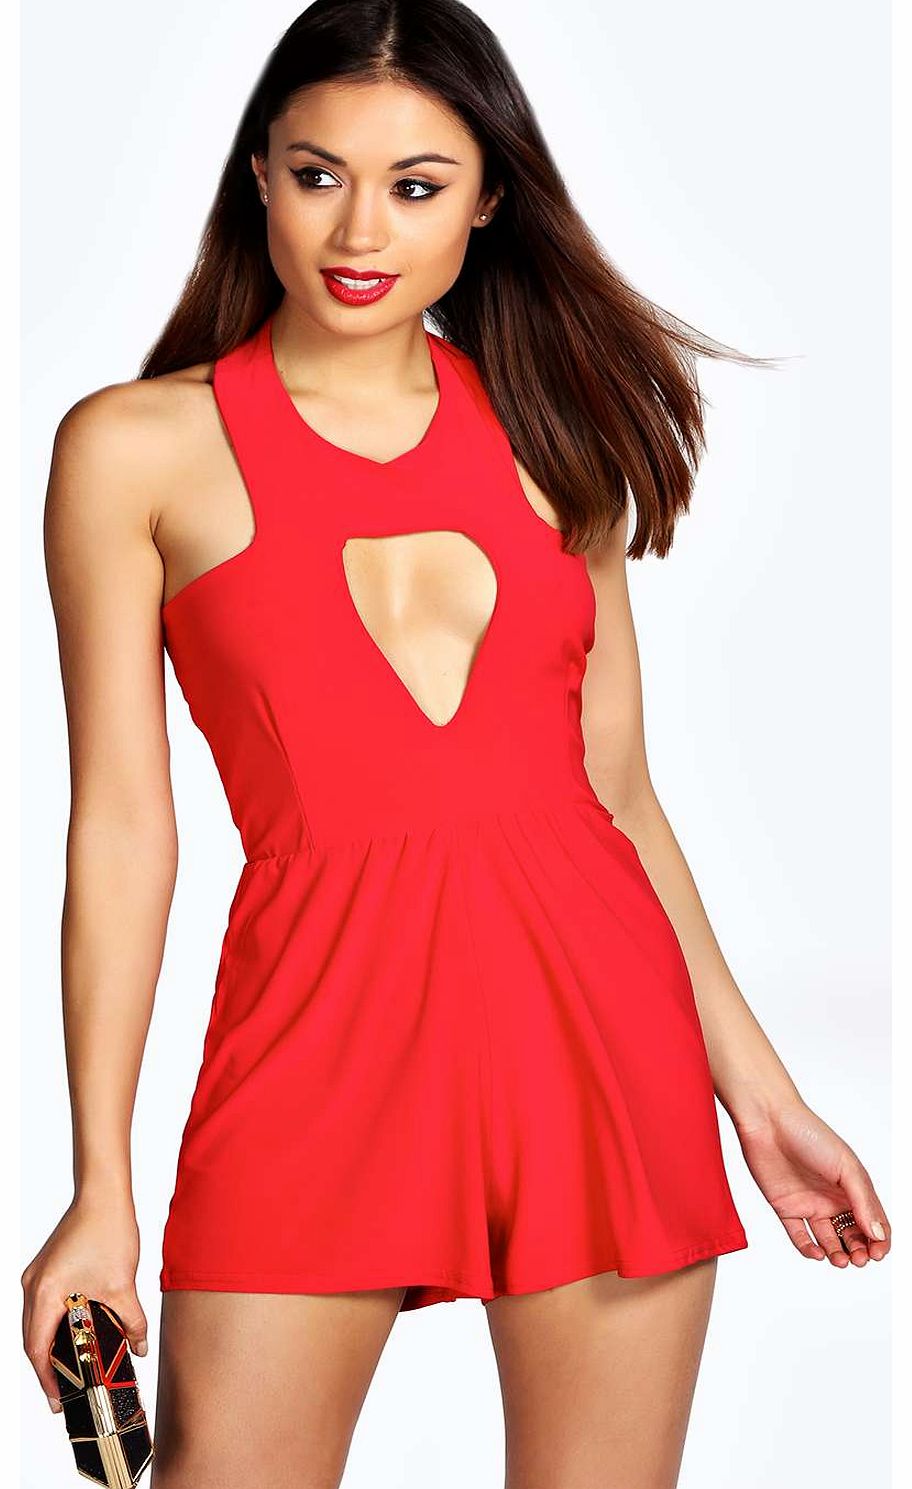 Larah Cut Out Slinky Playsuit - red azz17842